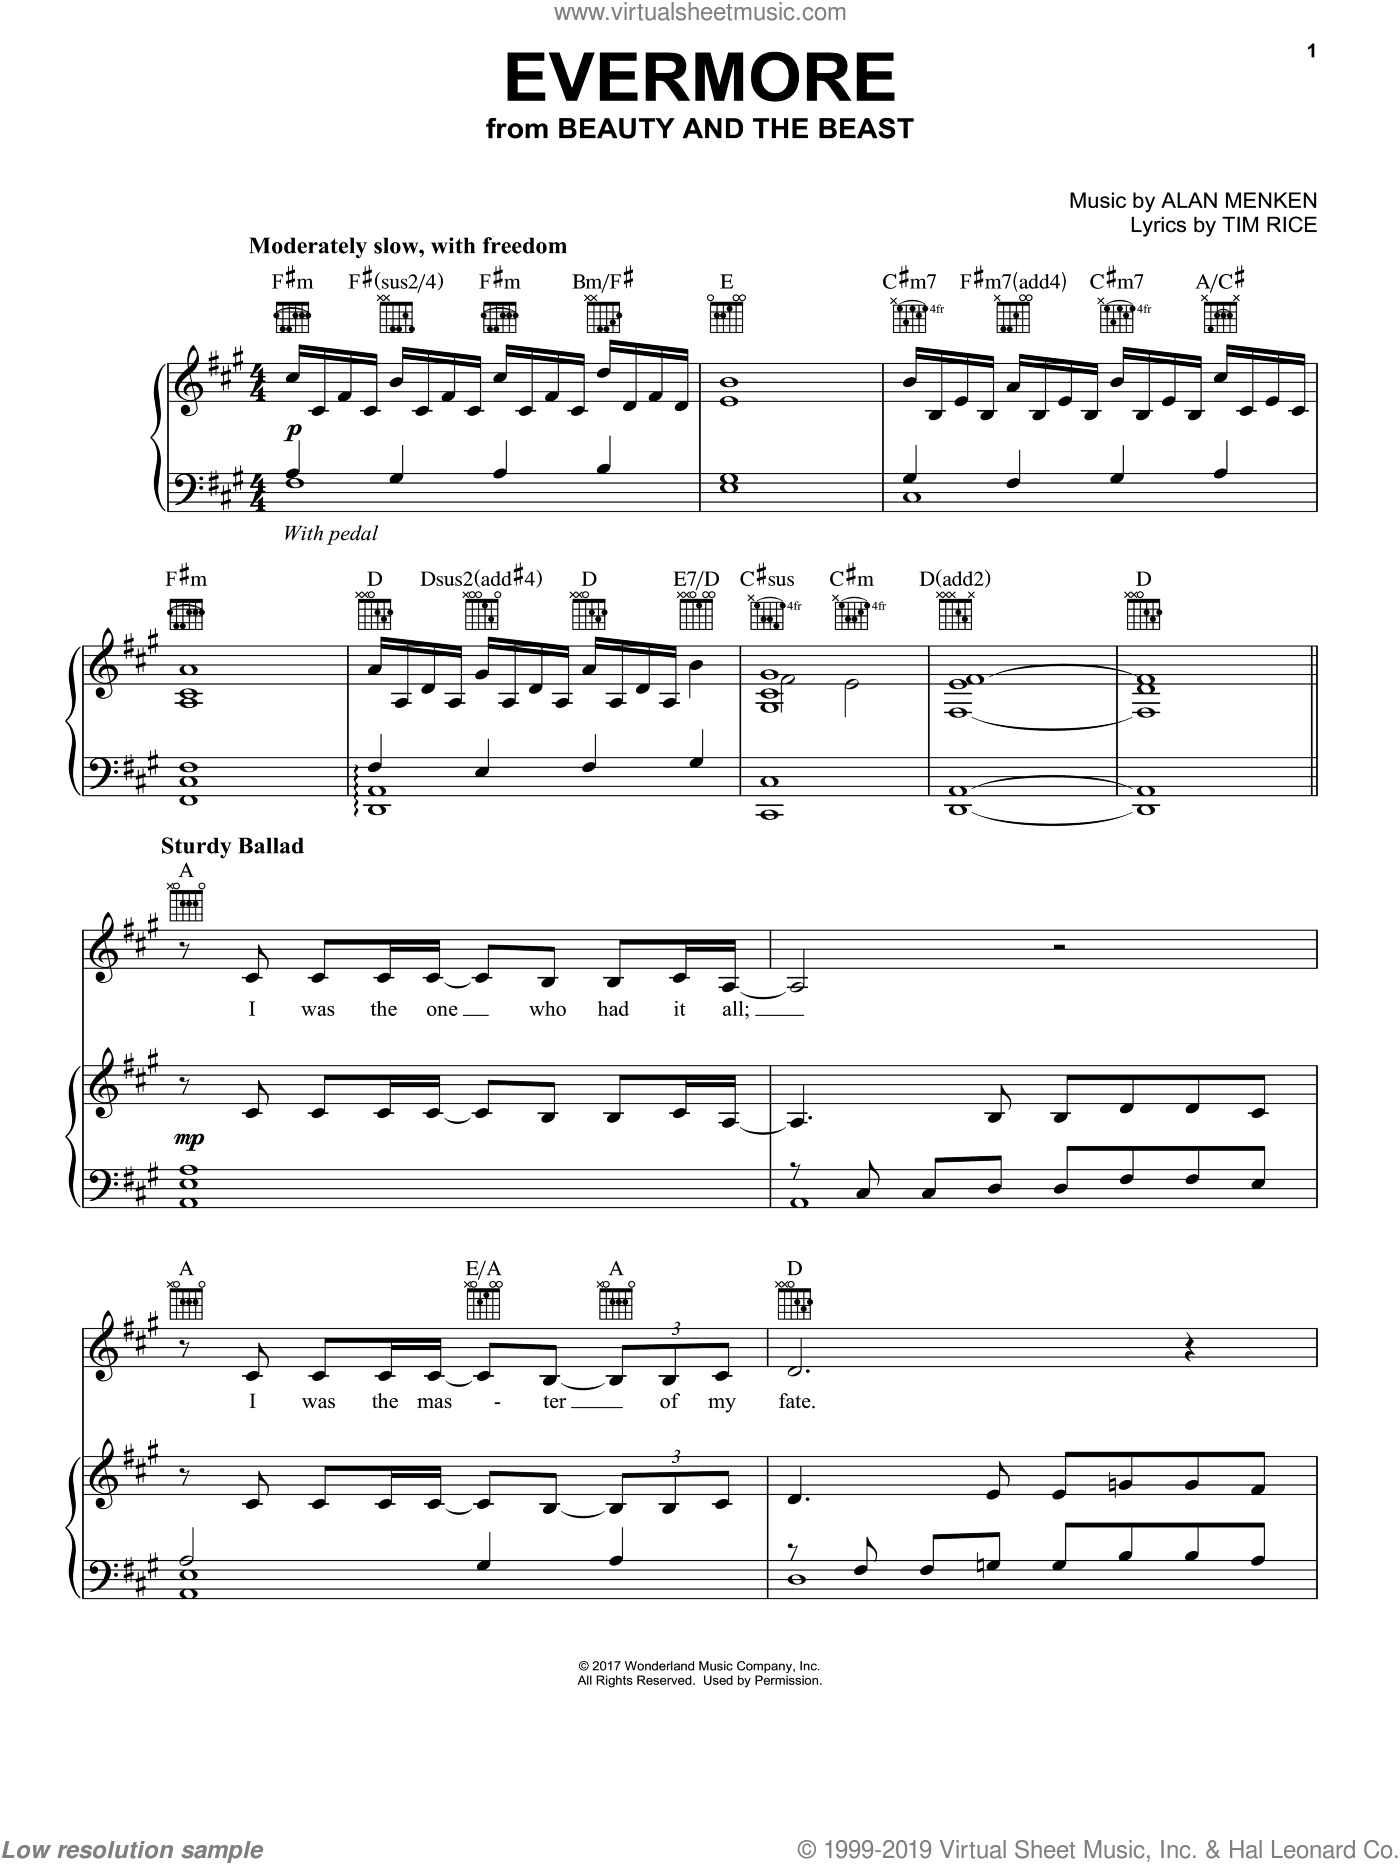 Groban - Evermore (from Beauty and the Beast) sheet music ...